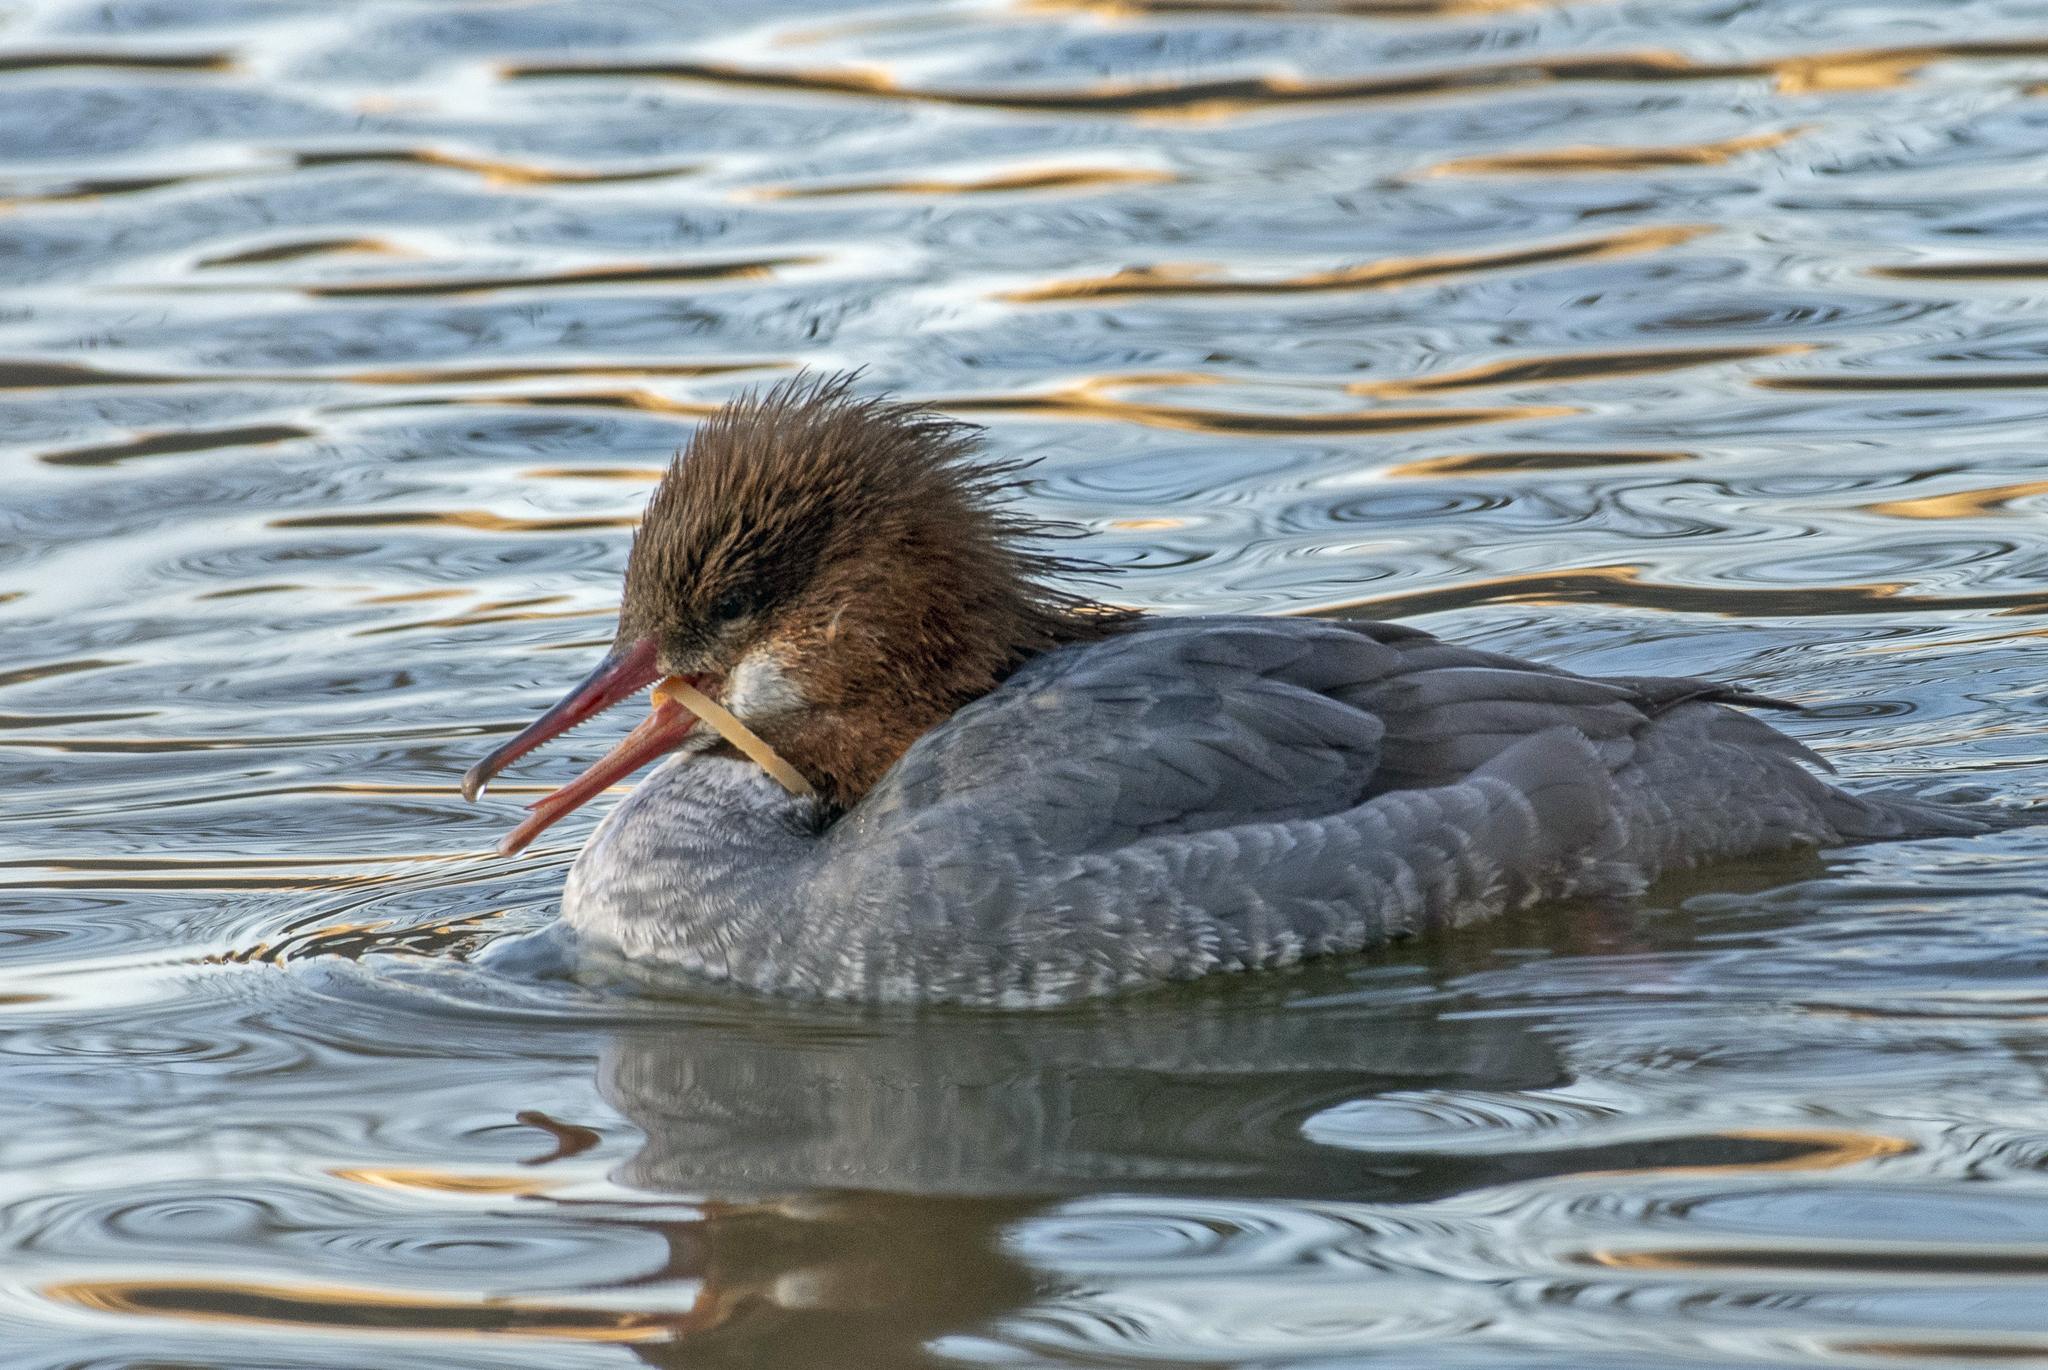 Common merganser, a rare sight in New York, is struggling to eat because of the stuck in its bill